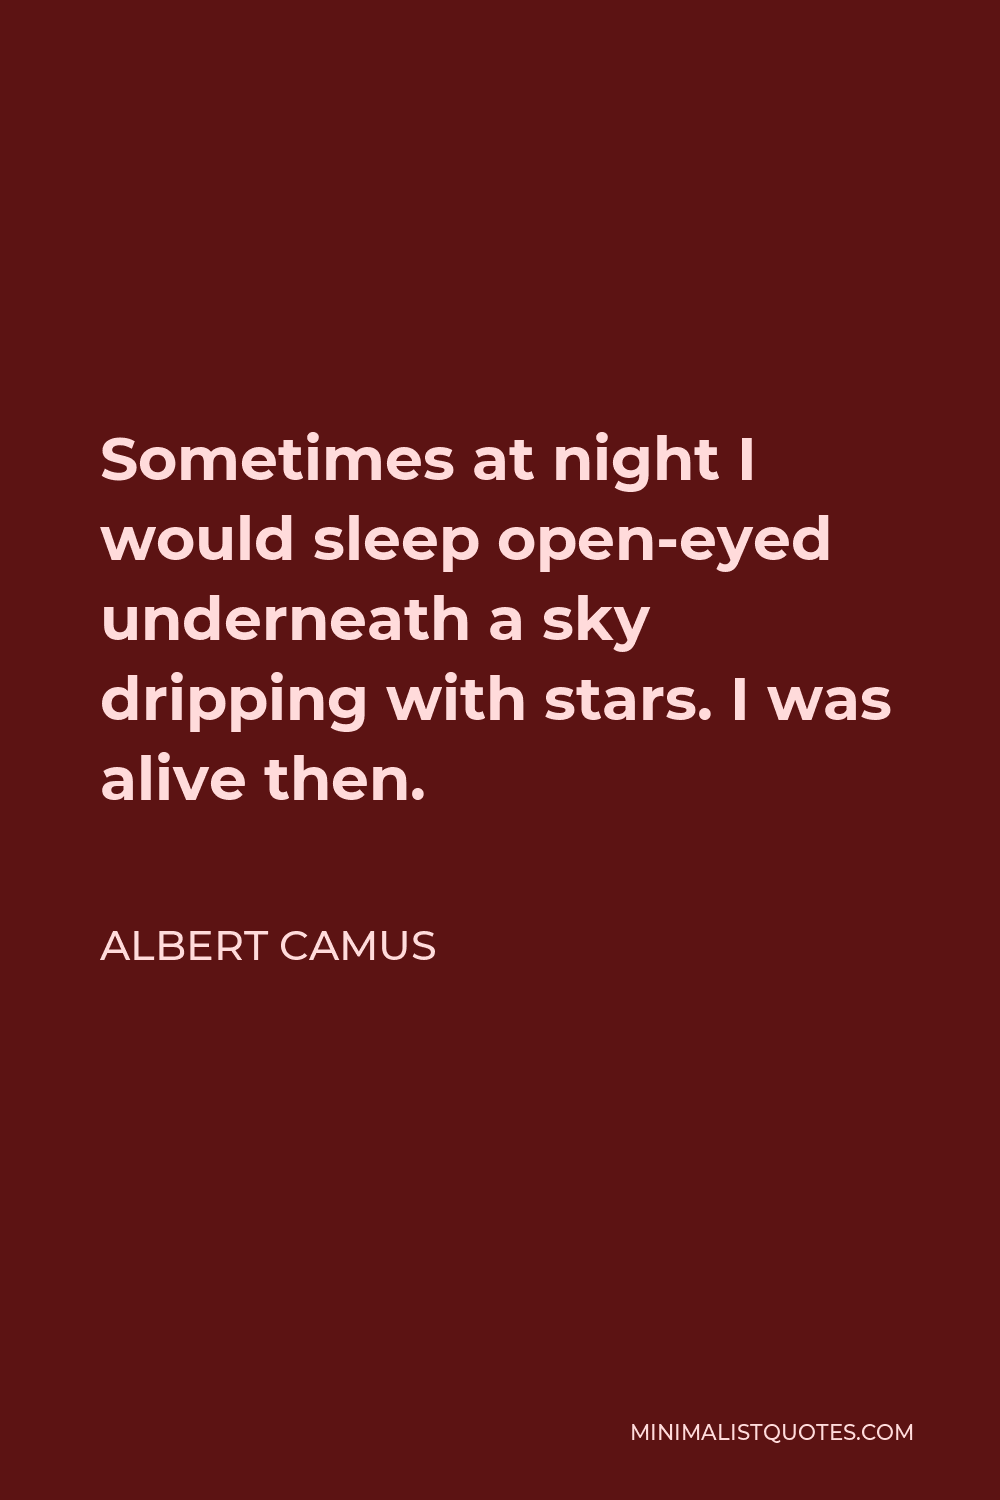 Albert Camus Quote - Sometimes at night I would sleep open-eyed underneath a sky dripping with stars. I was alive then.